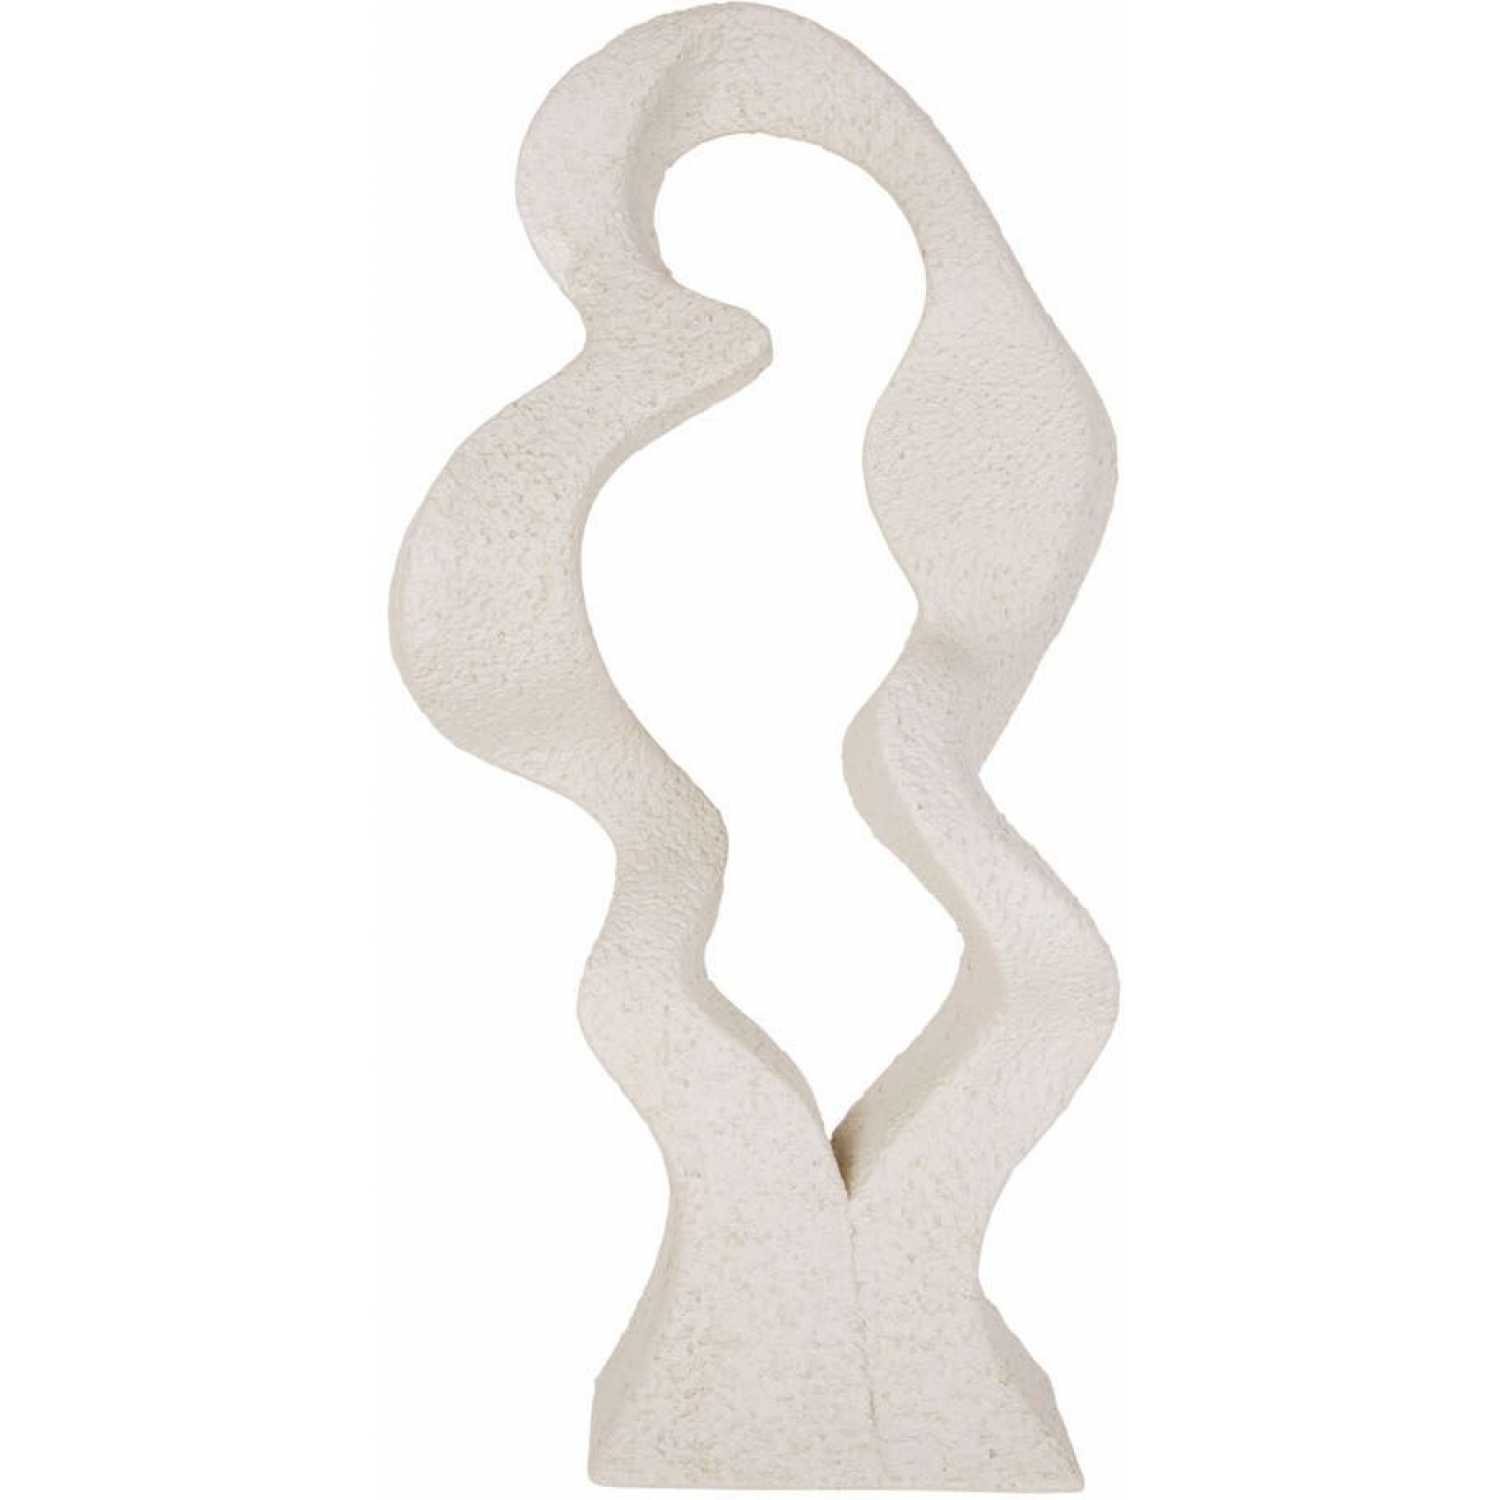 Present Time Wave Ornament - Ivory